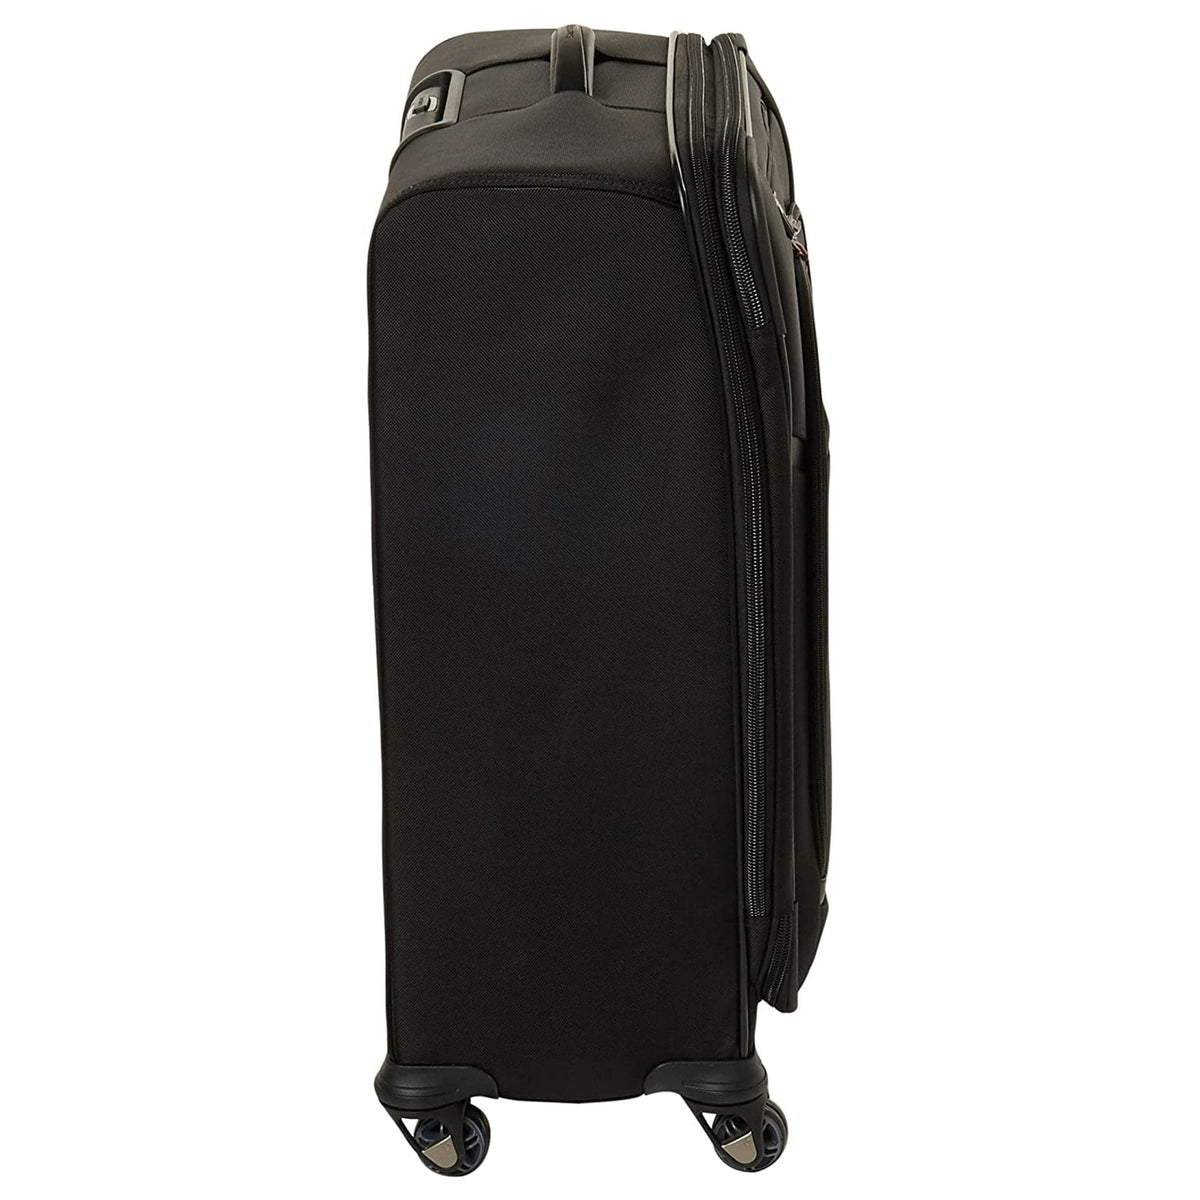 Samsonite Pro 4 Deluxe 25" Expandable Spinner Luggage